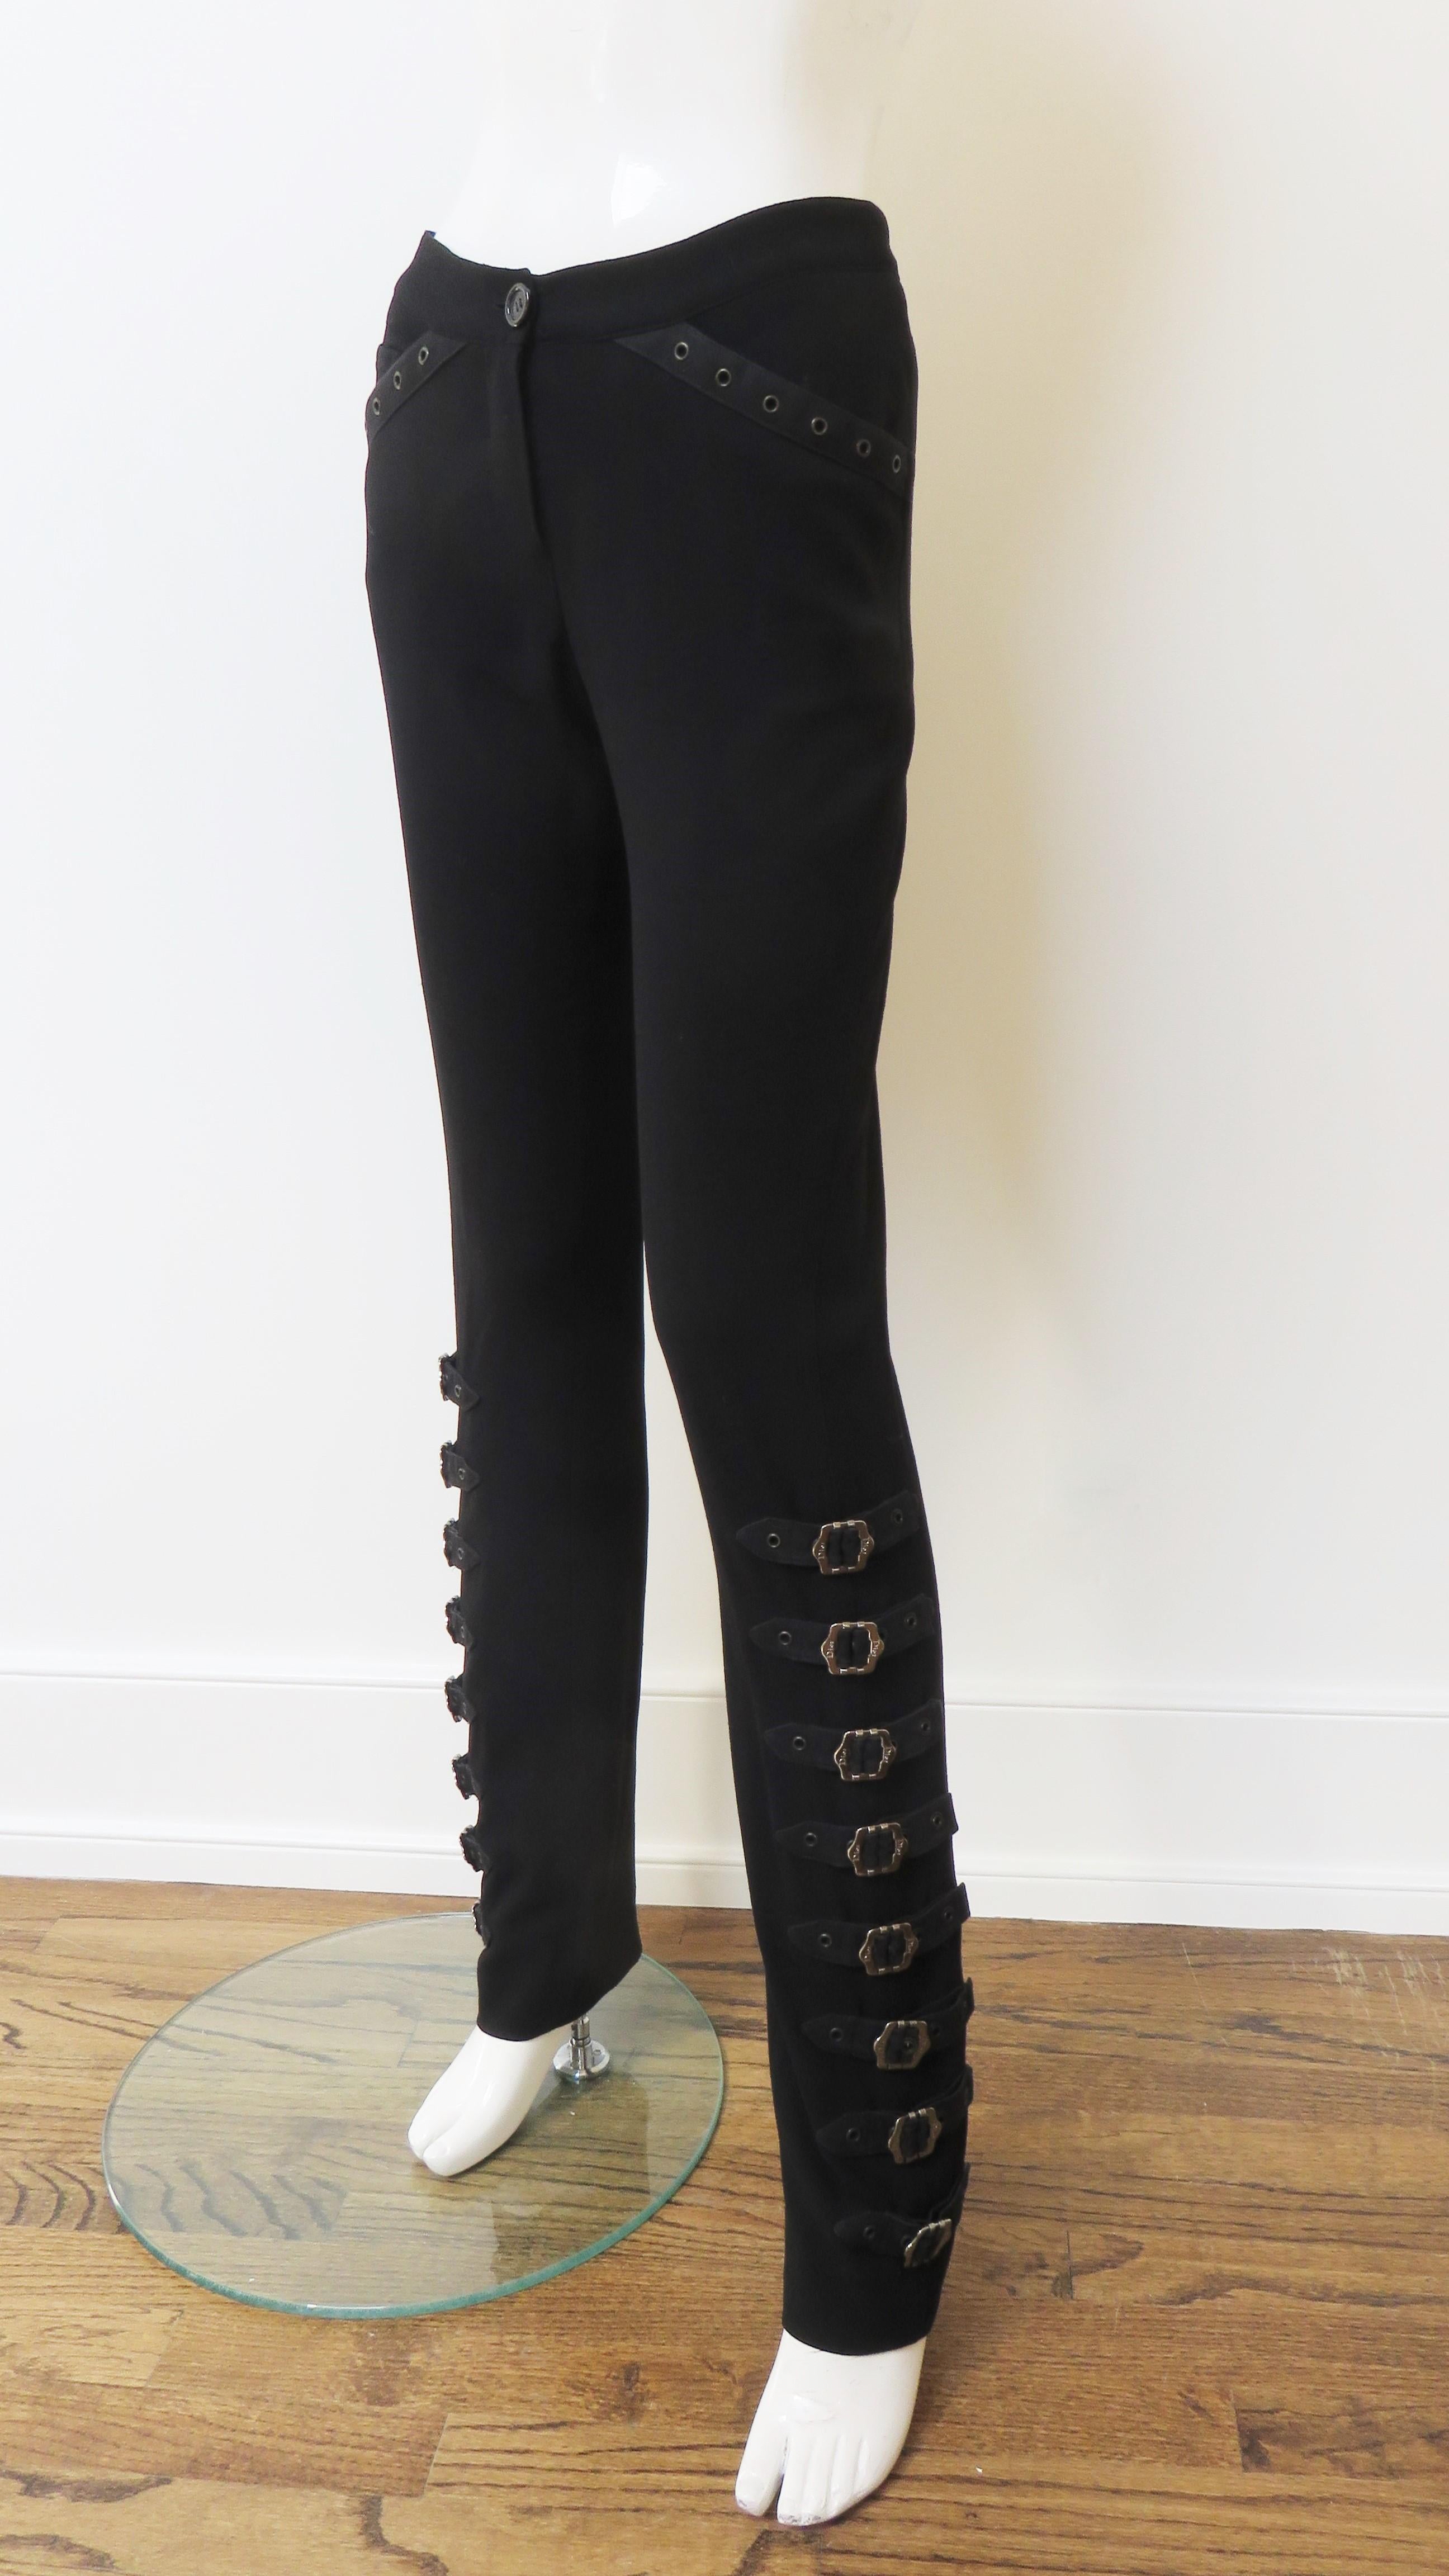 Christian Dior by John Galliano Buckle Leg Pants In Good Condition For Sale In Water Mill, NY